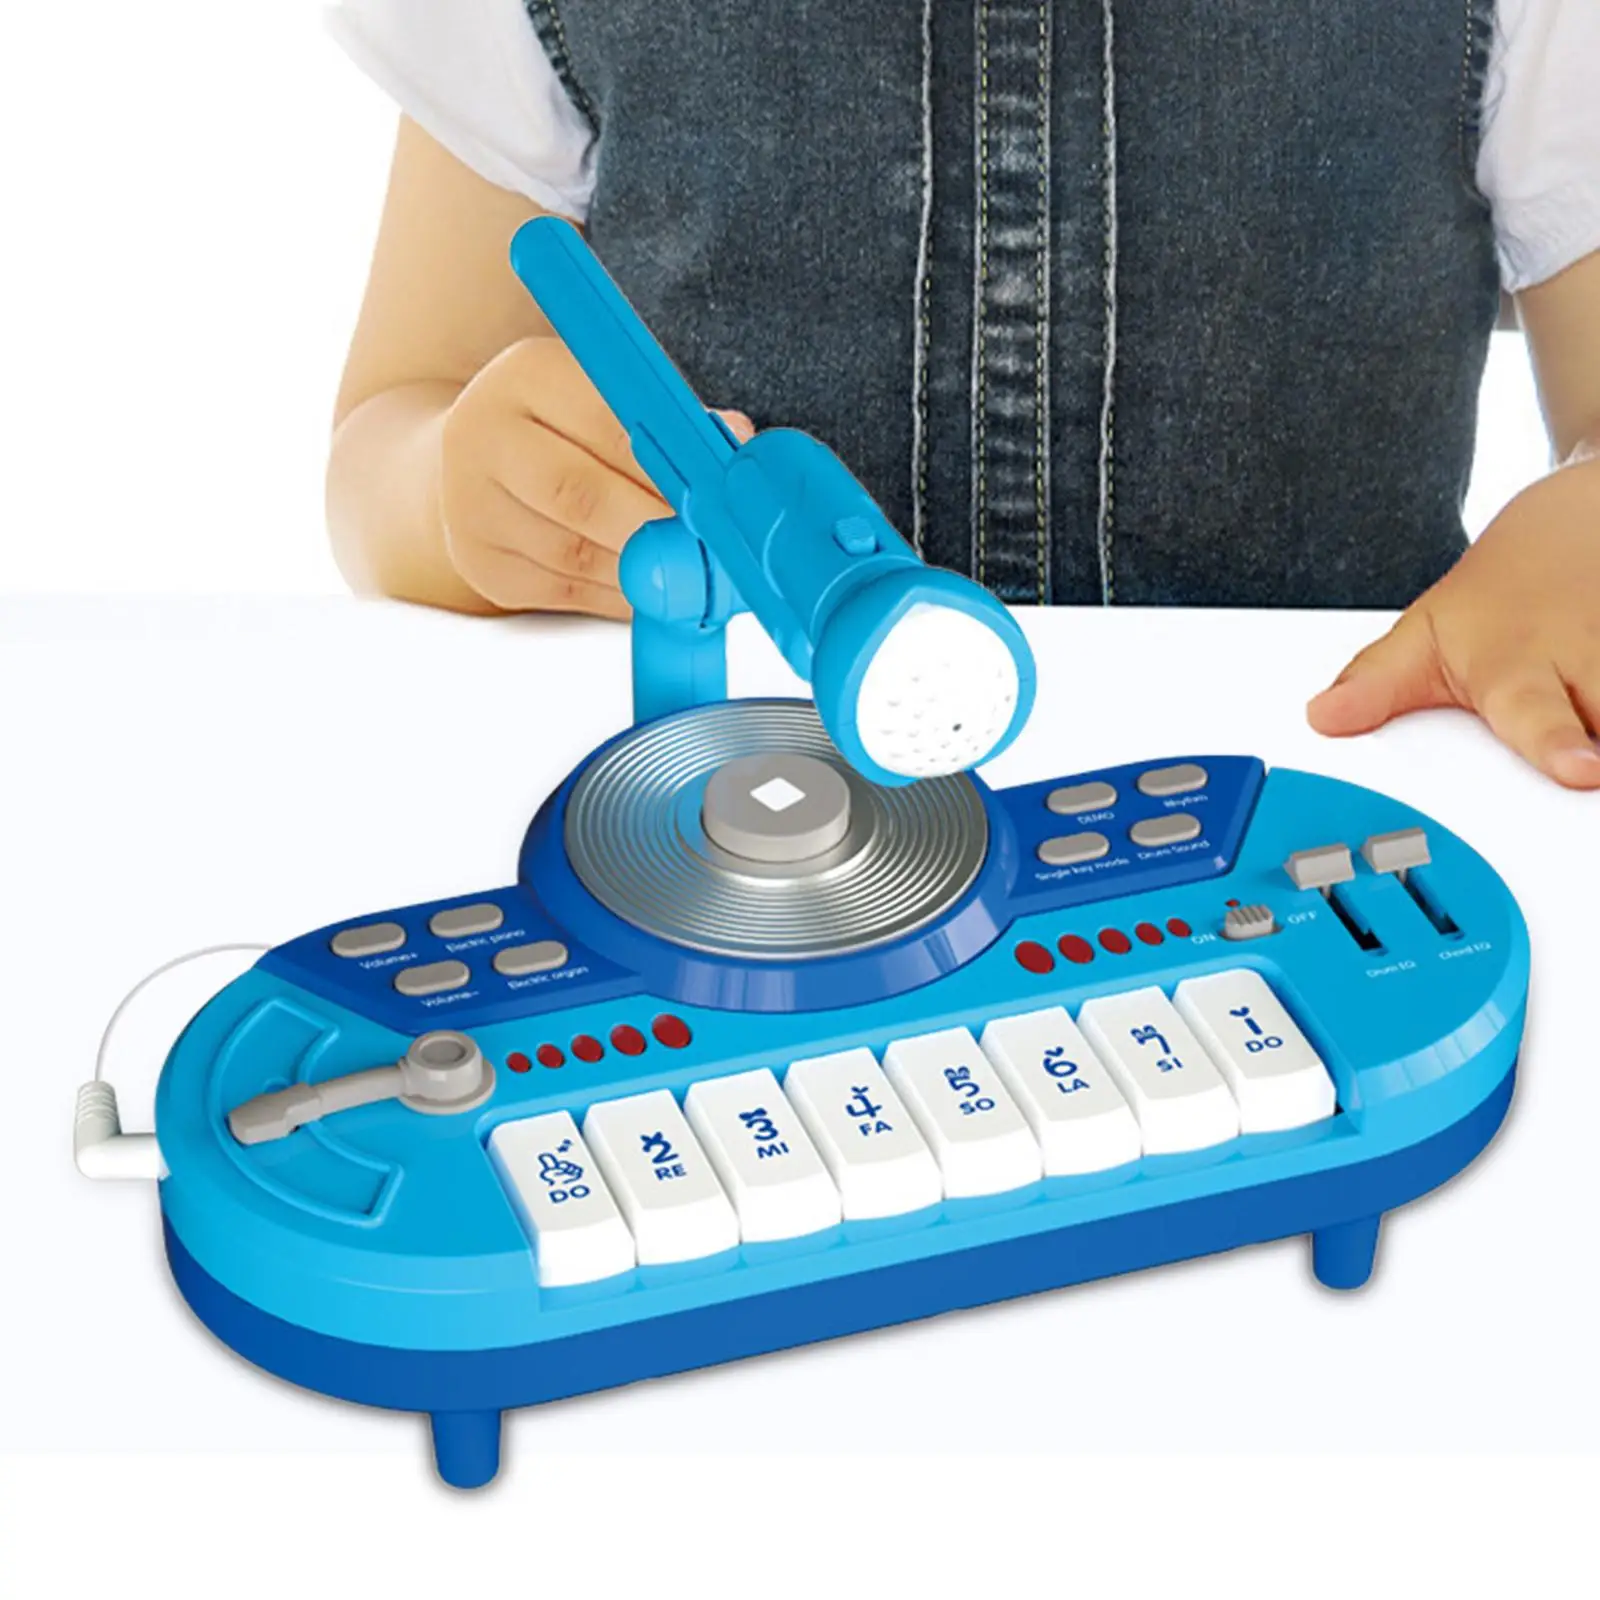 Musical Piano Toy Musical Educational 8 Key DJ Party Mixer Toy for Kids Children